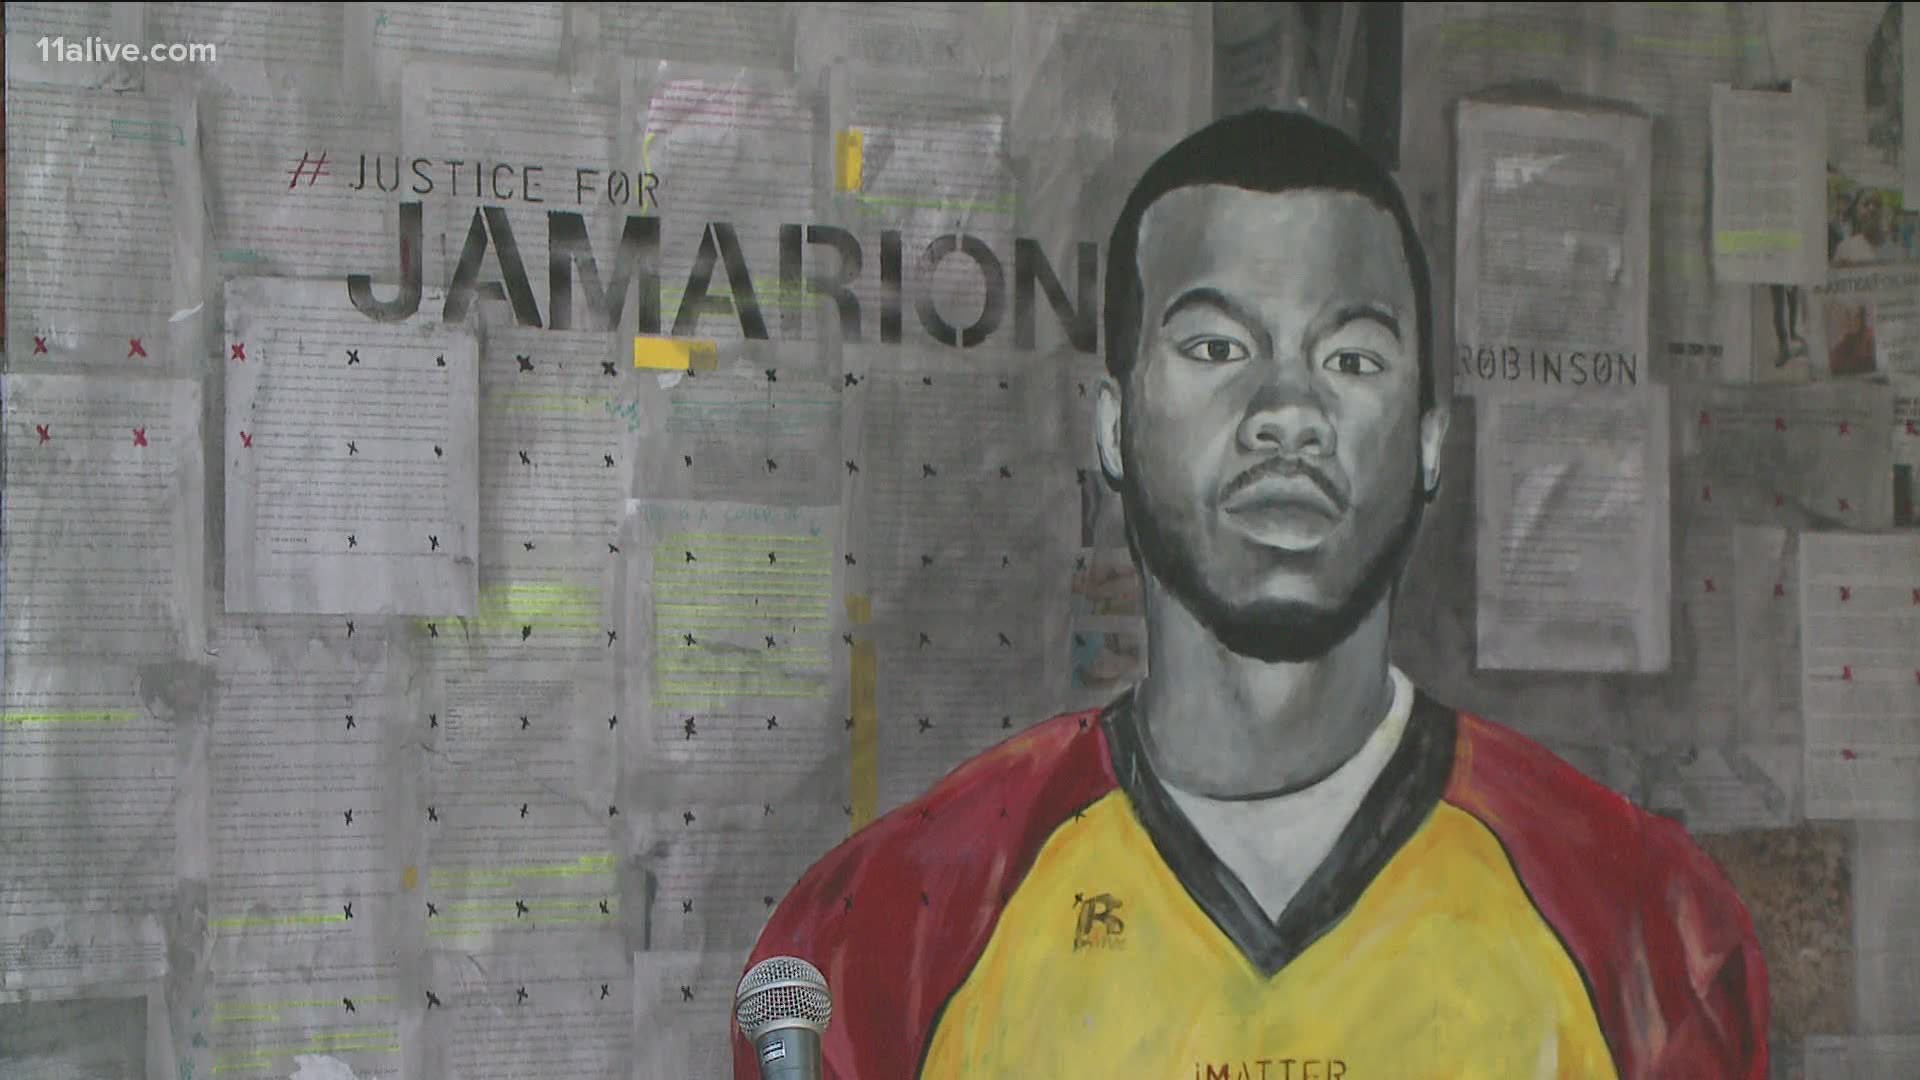 A vigil was held Wednesday night in honor of Jamarion Robinson's life.